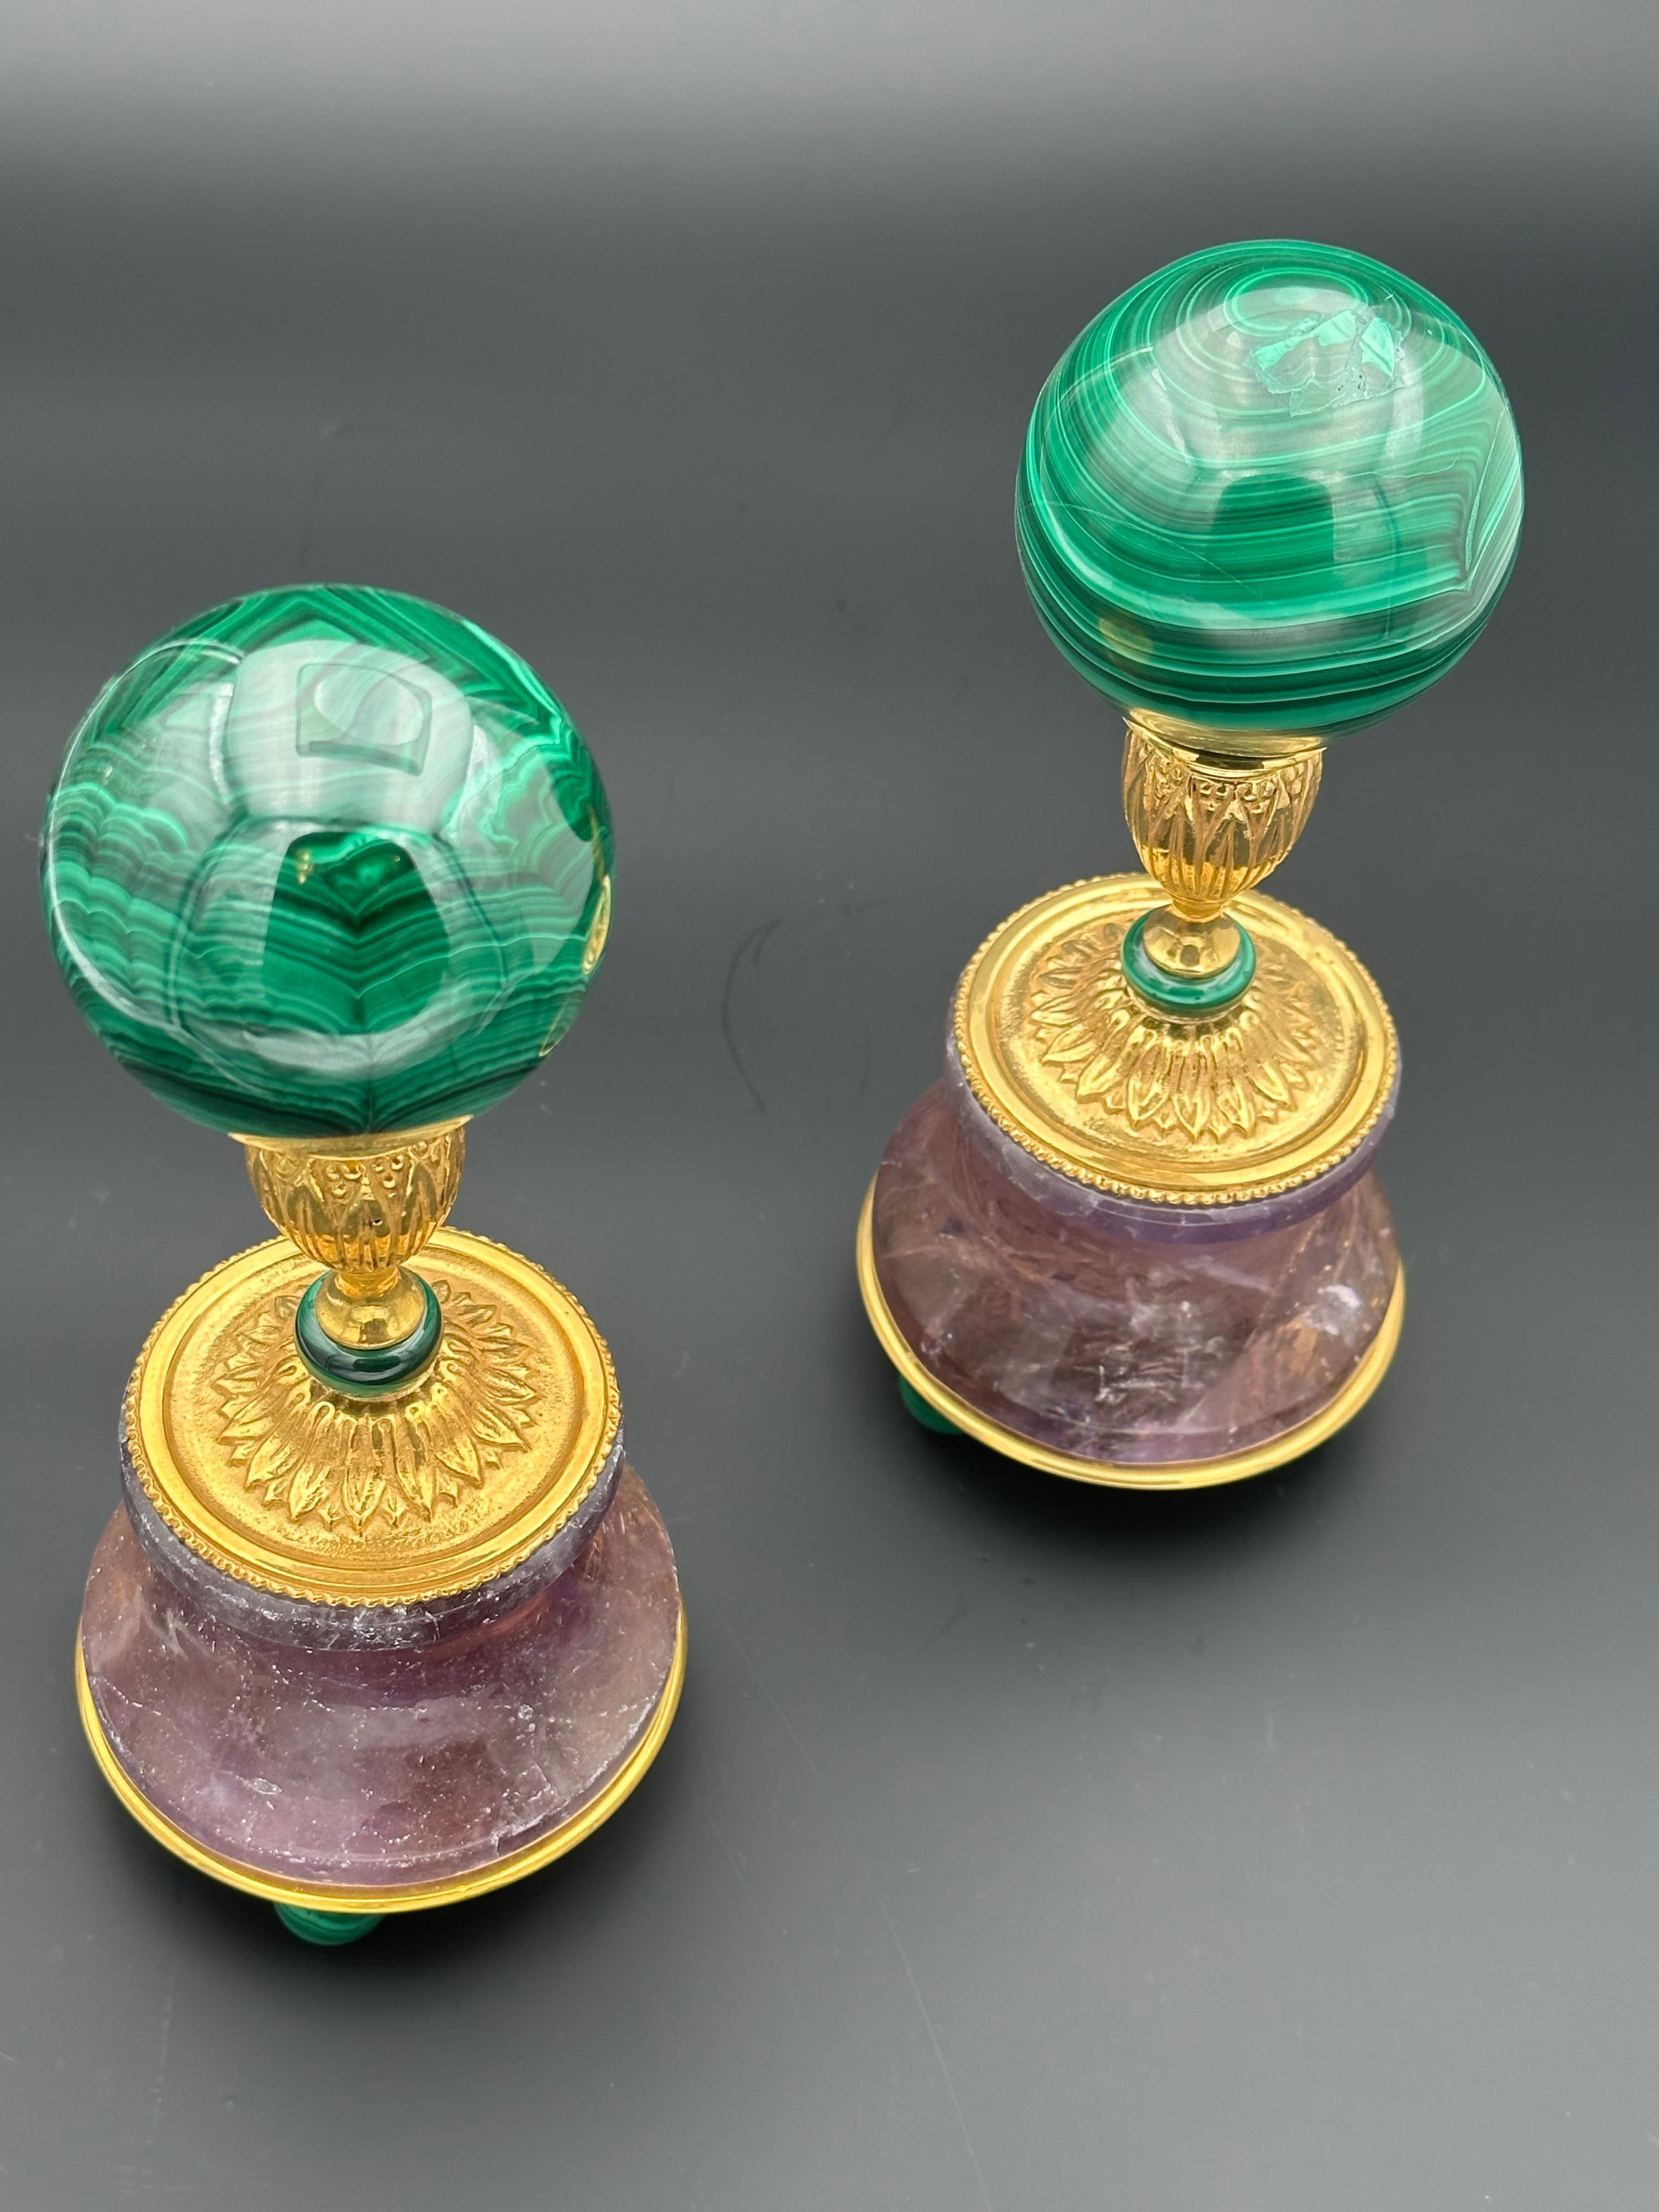 Amazing pair of malachite spheres (65 mm diameter)with their amethyst and malachite supports.
Made in FRANCE .